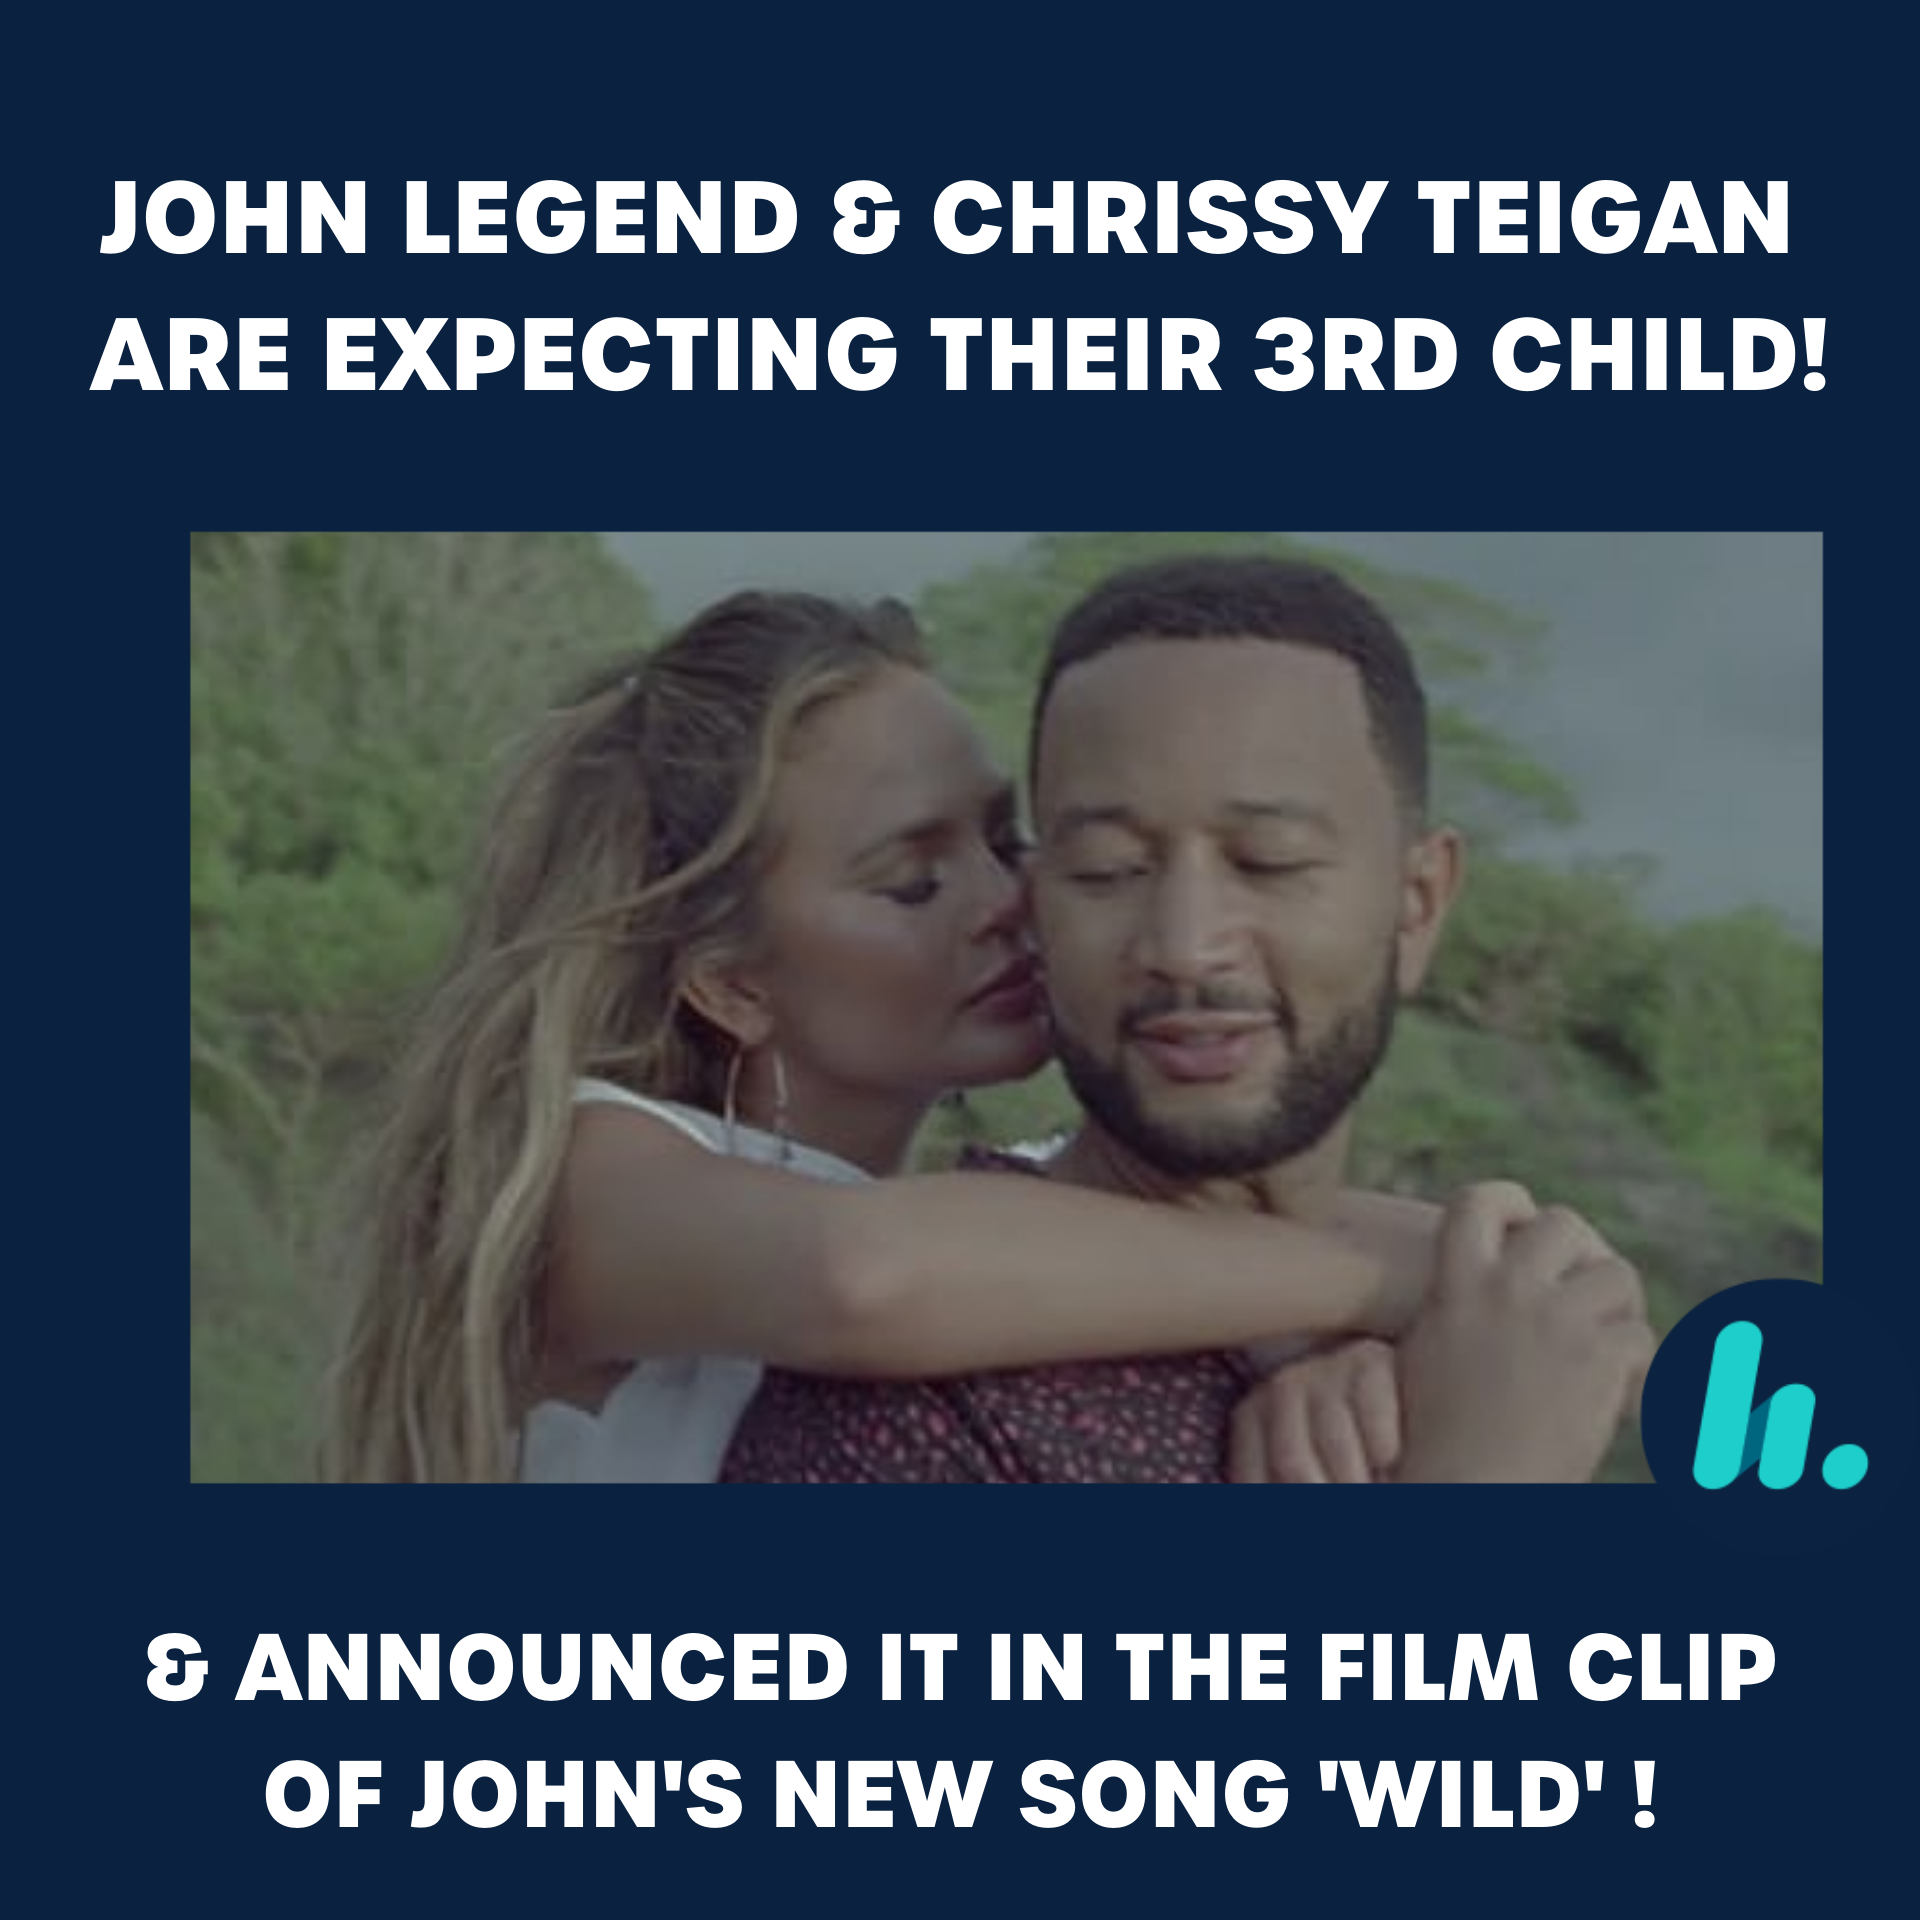 Chrissy Teigan & John Legend are Having Another Baby!